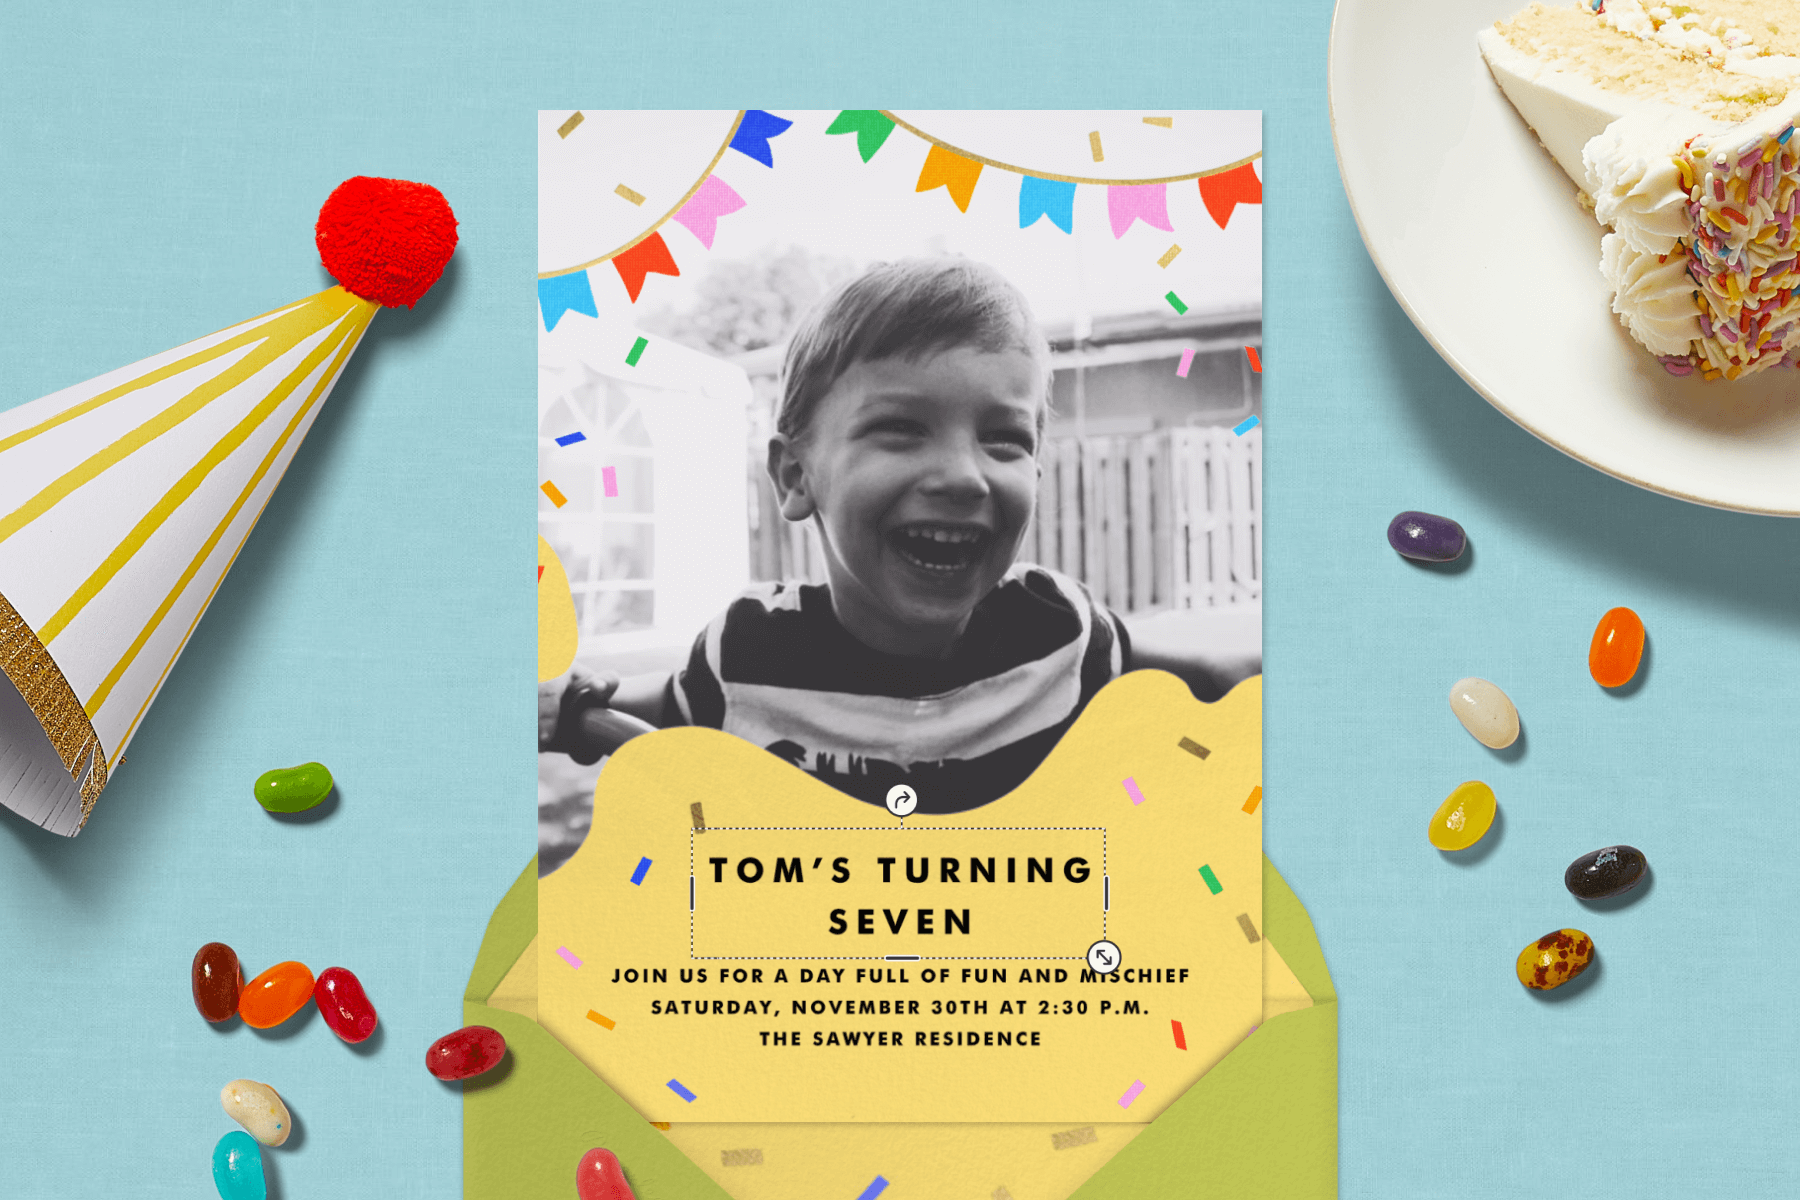 A kids’ birthday party invitation with banners over a photo, surrounded by festive items like a hat, a piece of cake, and jelly beans.